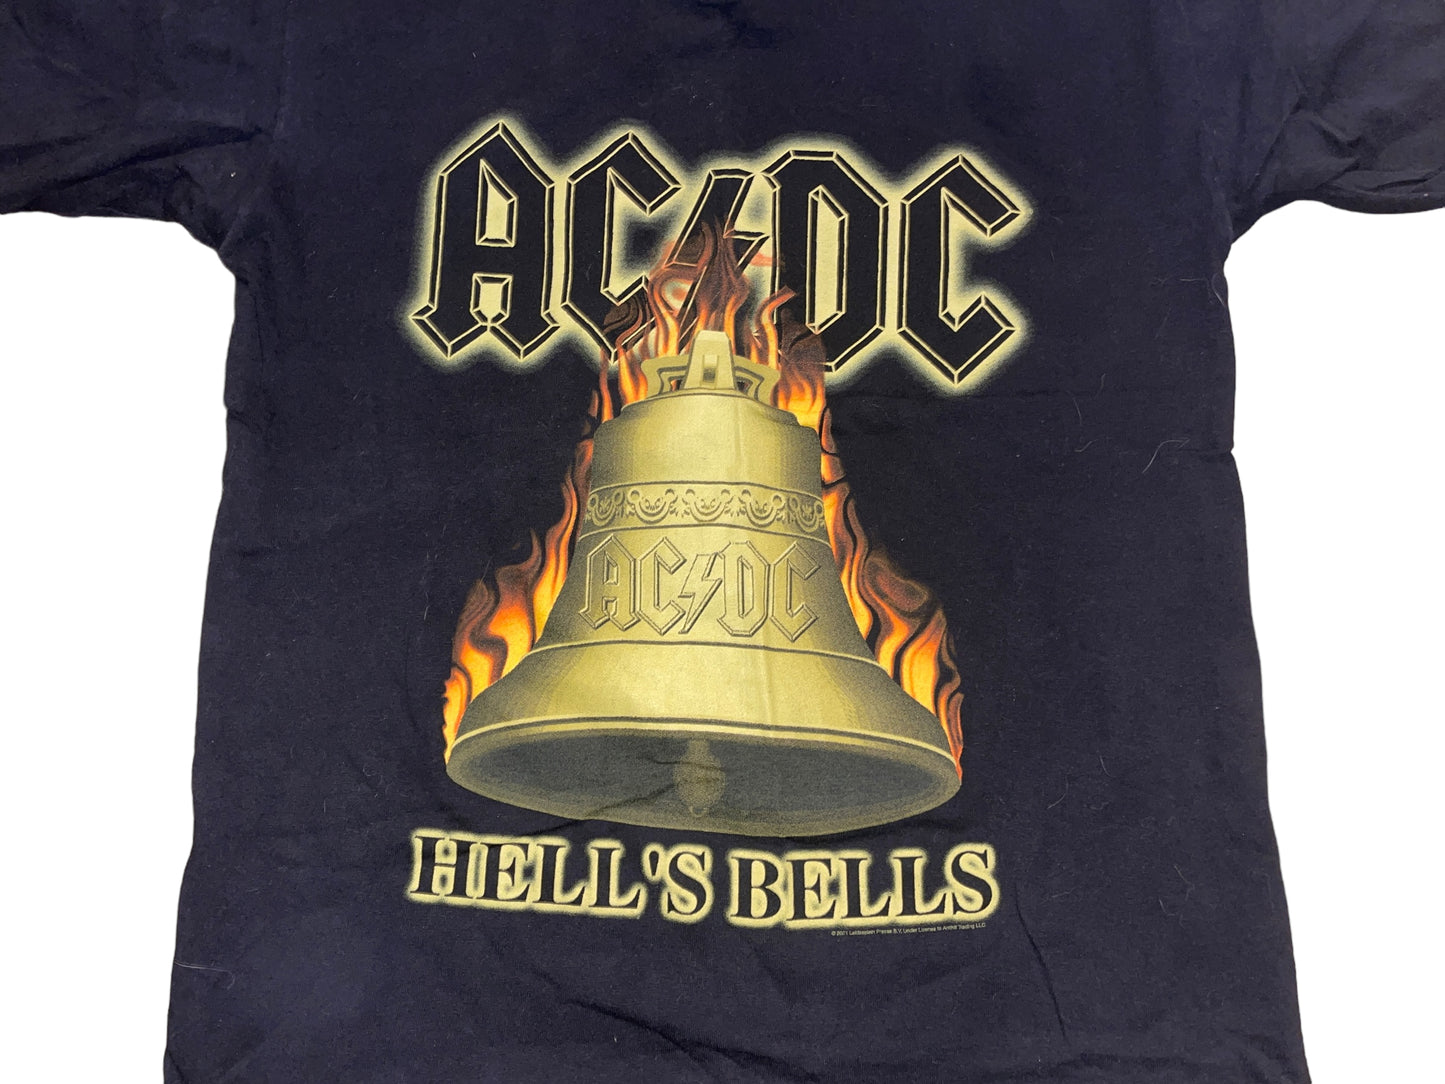 Vintage 2001 ACDC T-Shirt